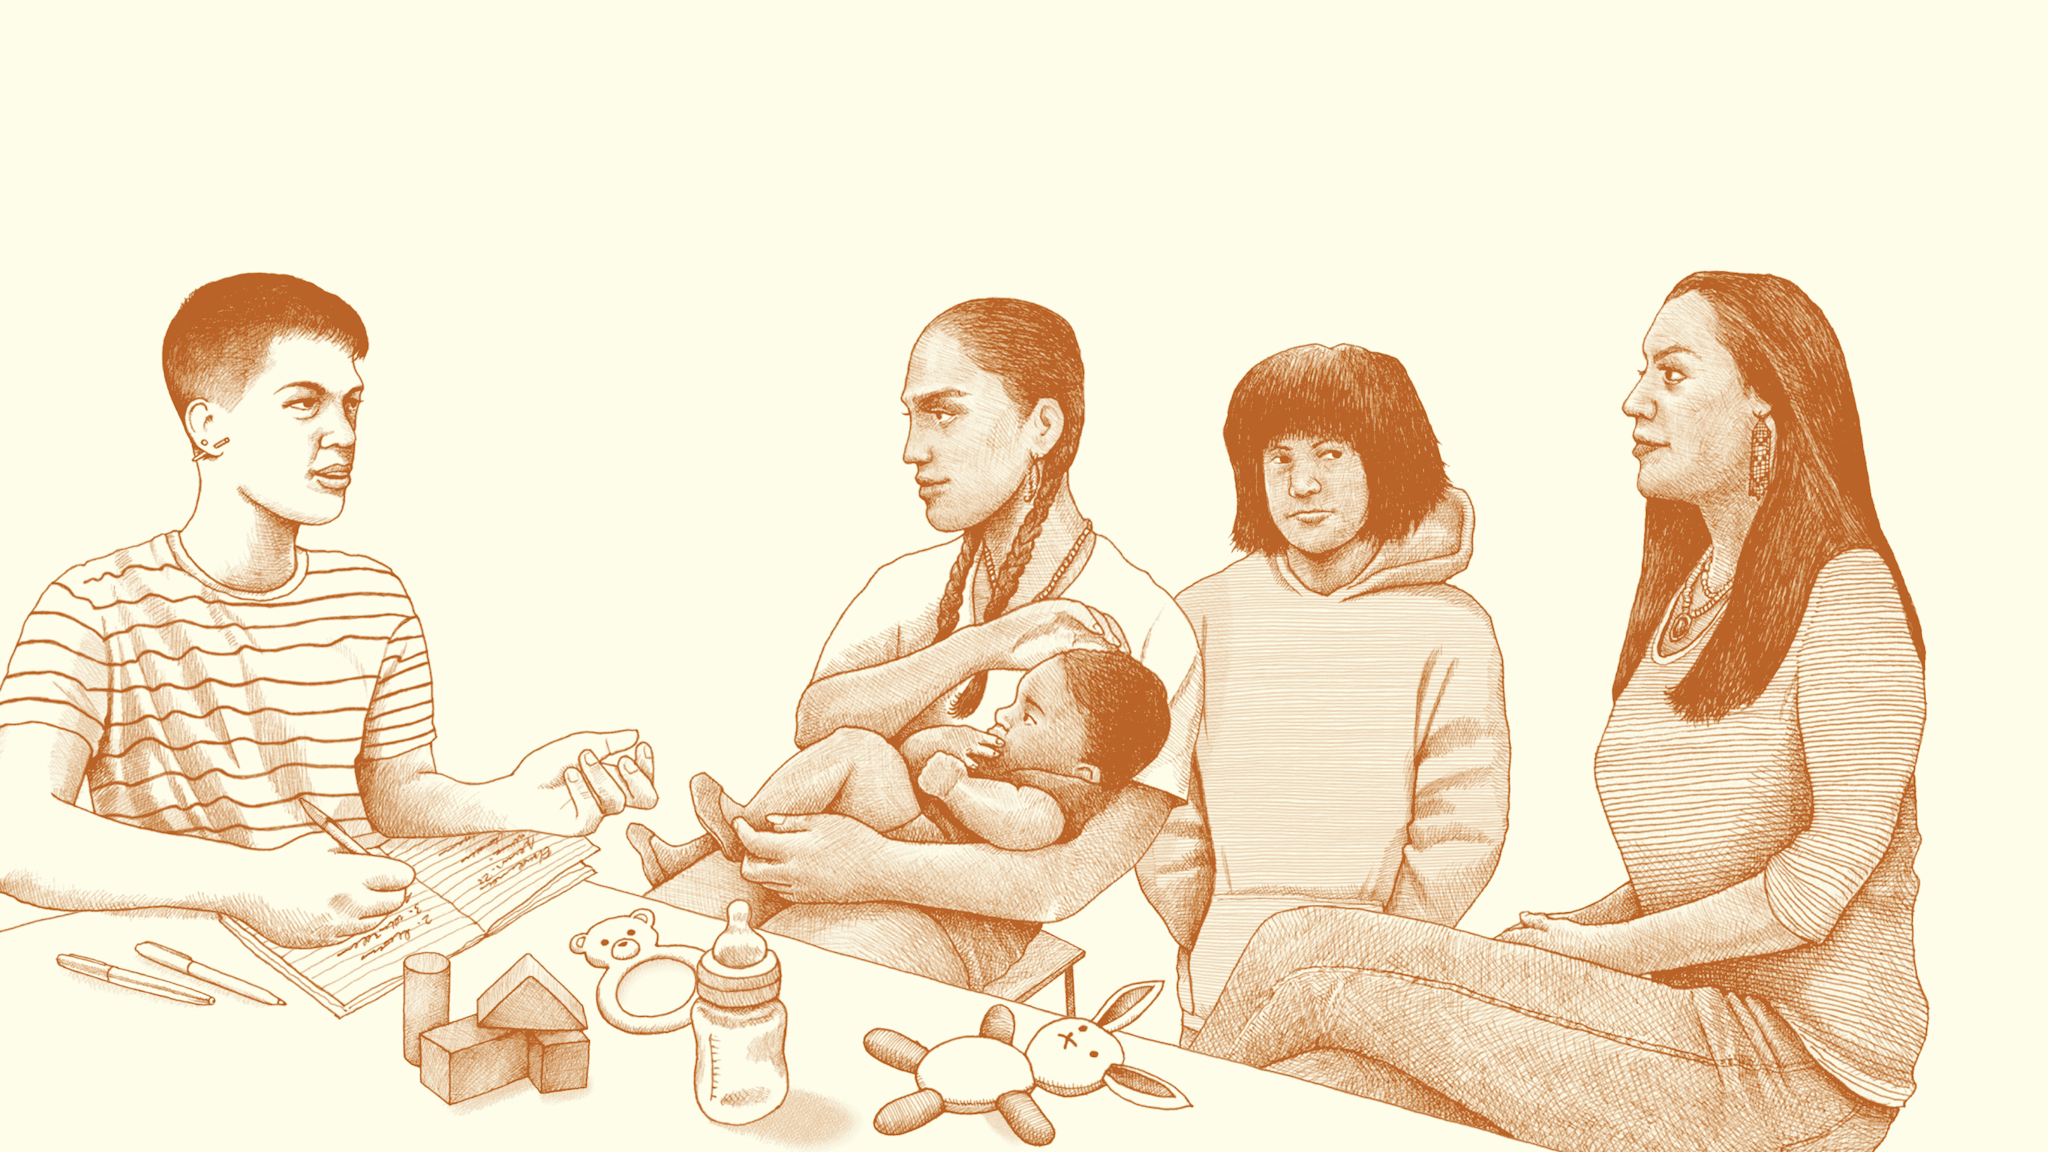 An illustration of an Asian, genderqueer person sitting at a table with an open notebook. They are joined by two Indigenous American women, one of whom is holding a baby.